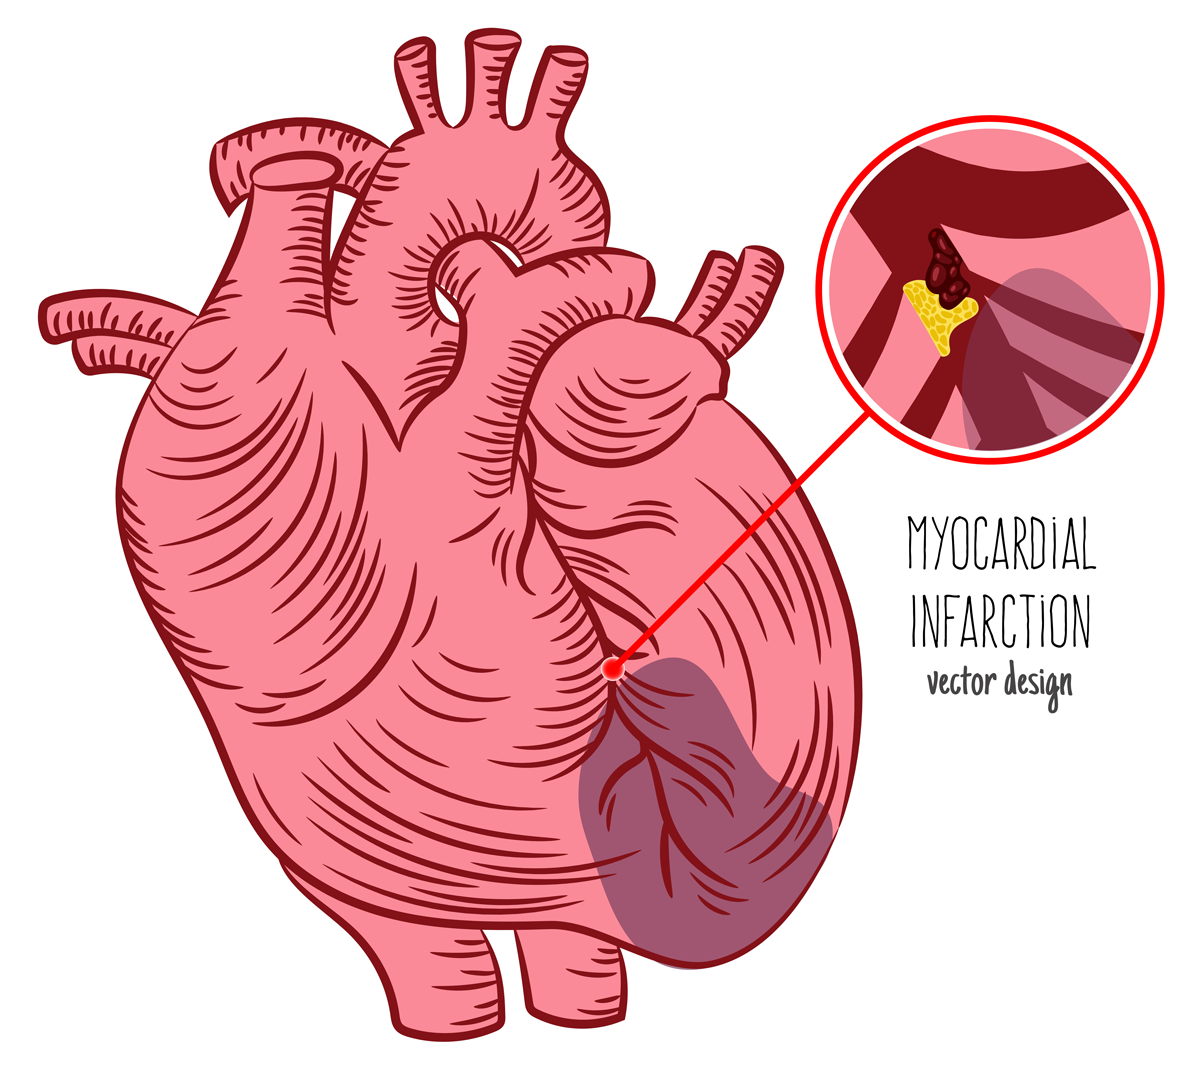 Fig. 2: Myocardial ischemia is the deprivation of oxygen and nutrients in the heart tissue typically caused by coronary occlusion.